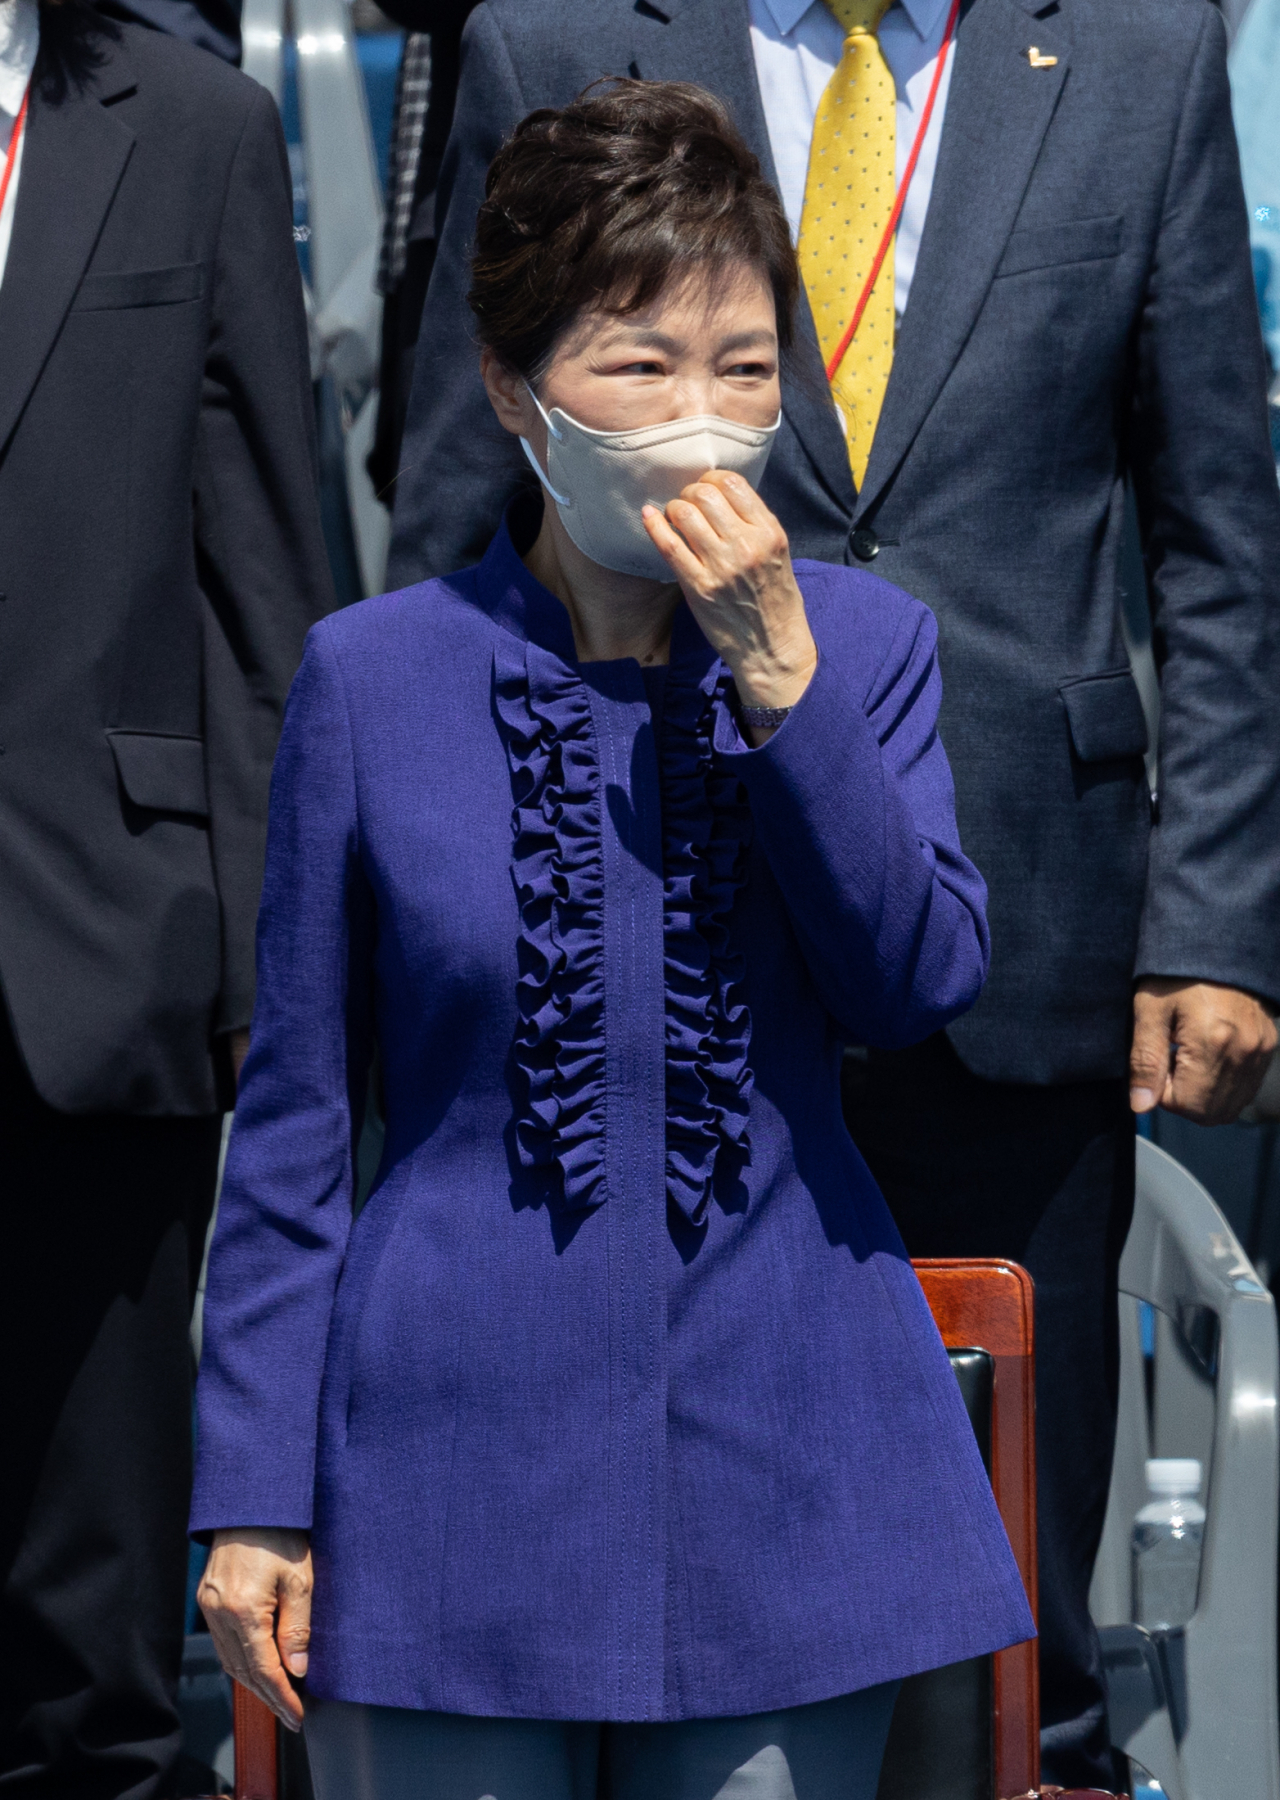 Park Geun-hye, a former president of South Korea, attends the inauguration ceremony of President Yoon Suk Yeol on May 10, 2022. (Lee Sang-sub/The Korea Herald)